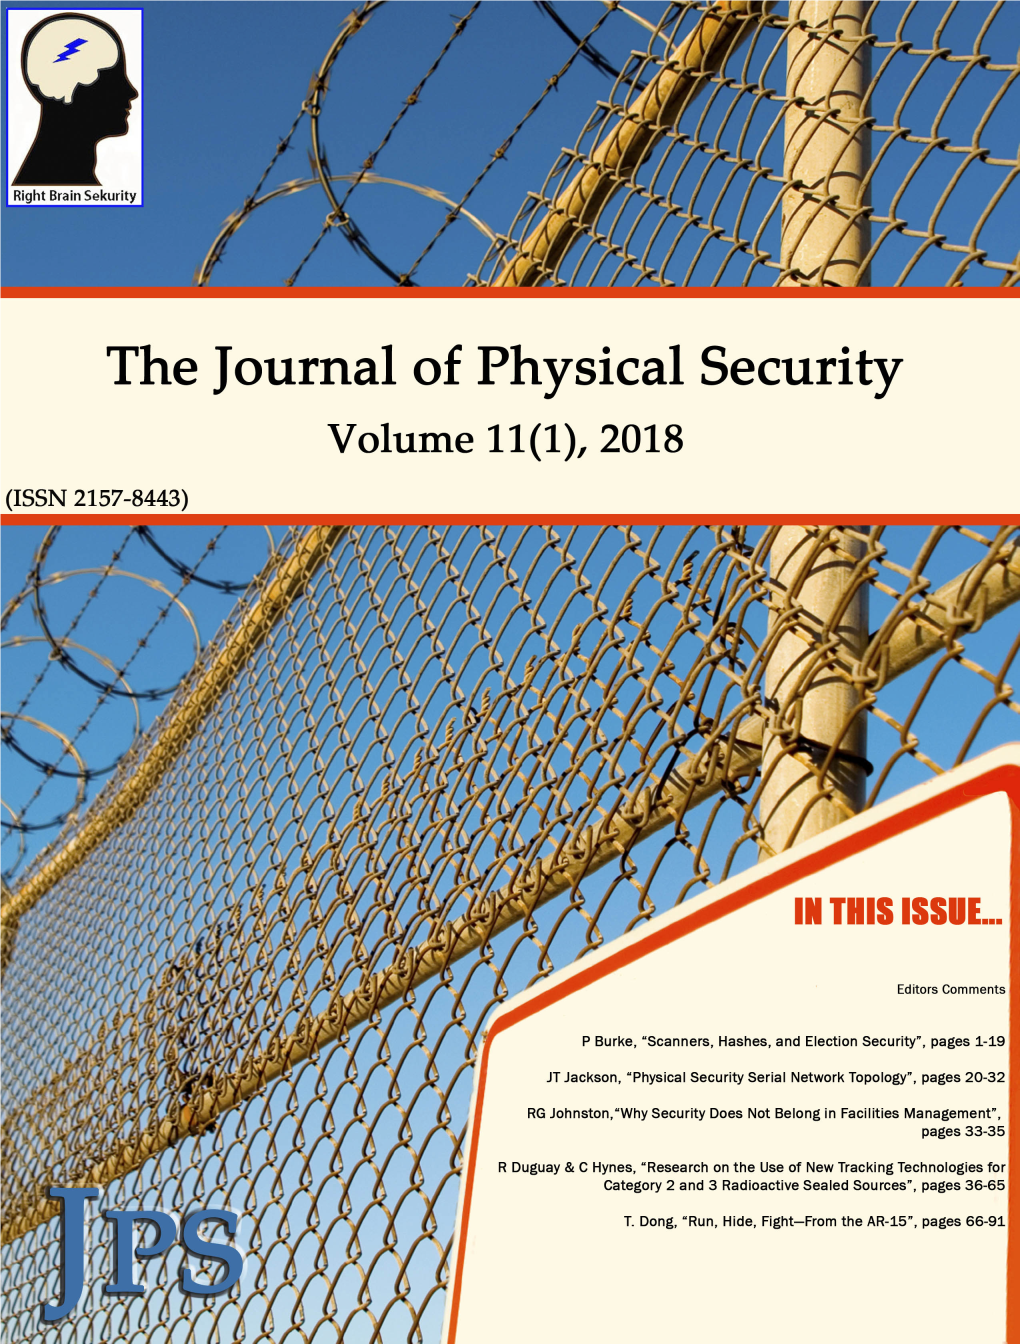 The Journal of Physical Security (JPS)